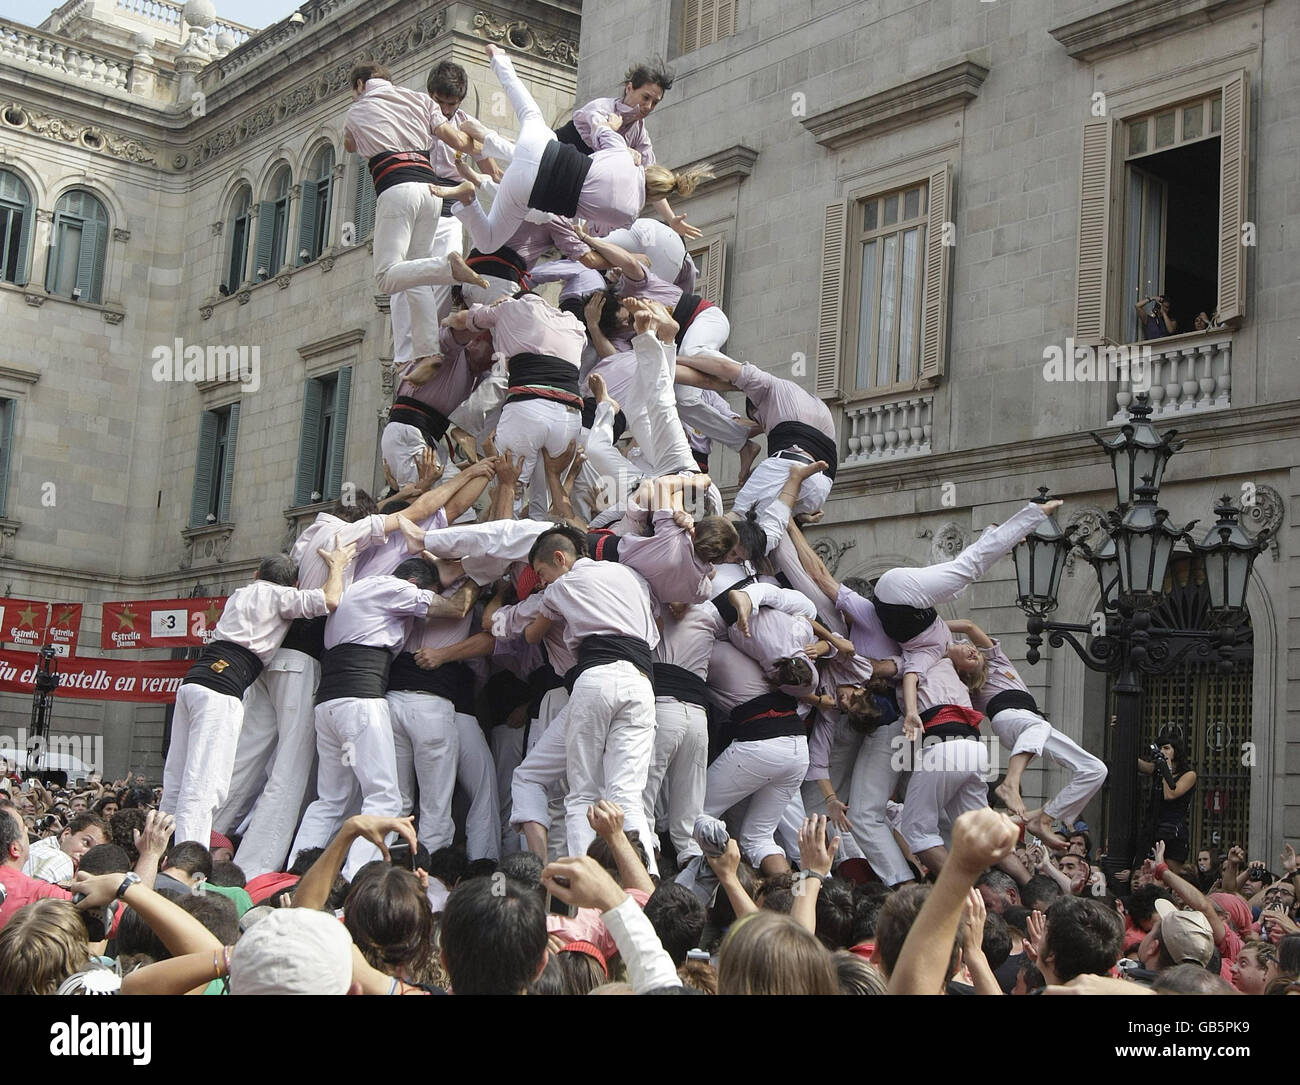 Thousands of people gather to watch competitors form a human 'Castell' during the Festival of Our Lady of Mercy in Barcelona, Catalonia. Stock Photo